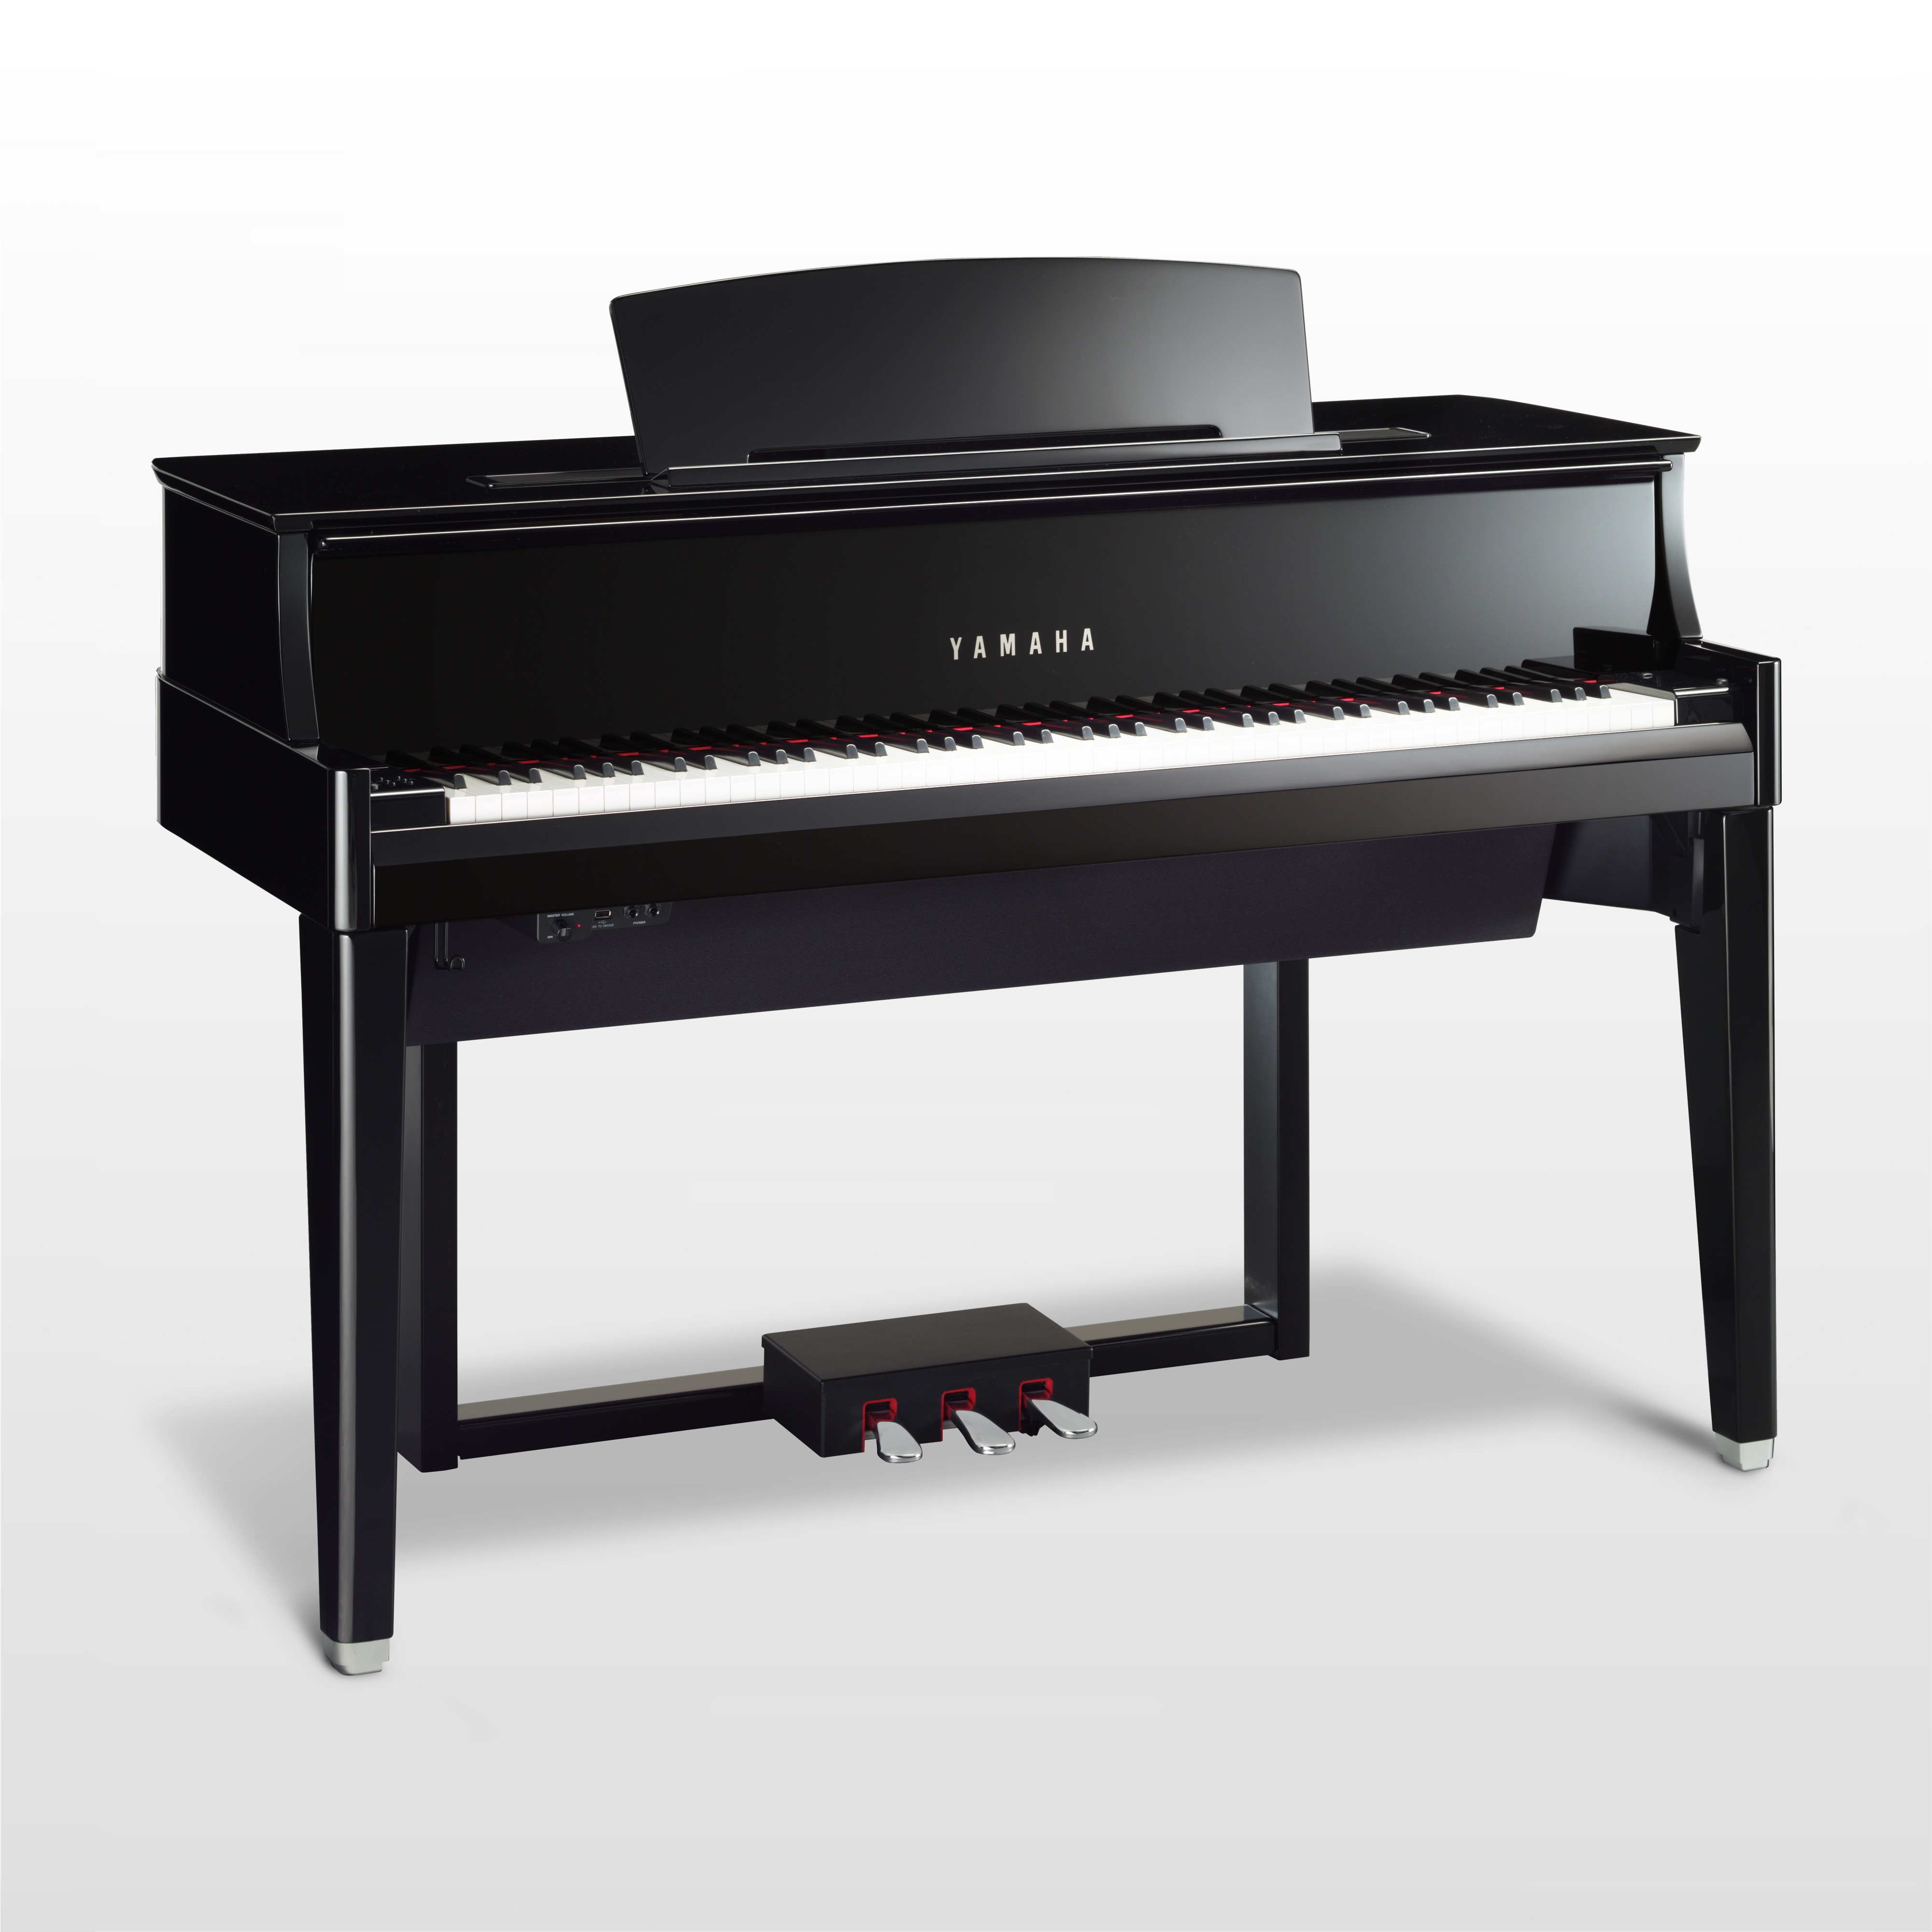 N1X - Overview - AvantGrand - Pianos - Musical Instruments ...